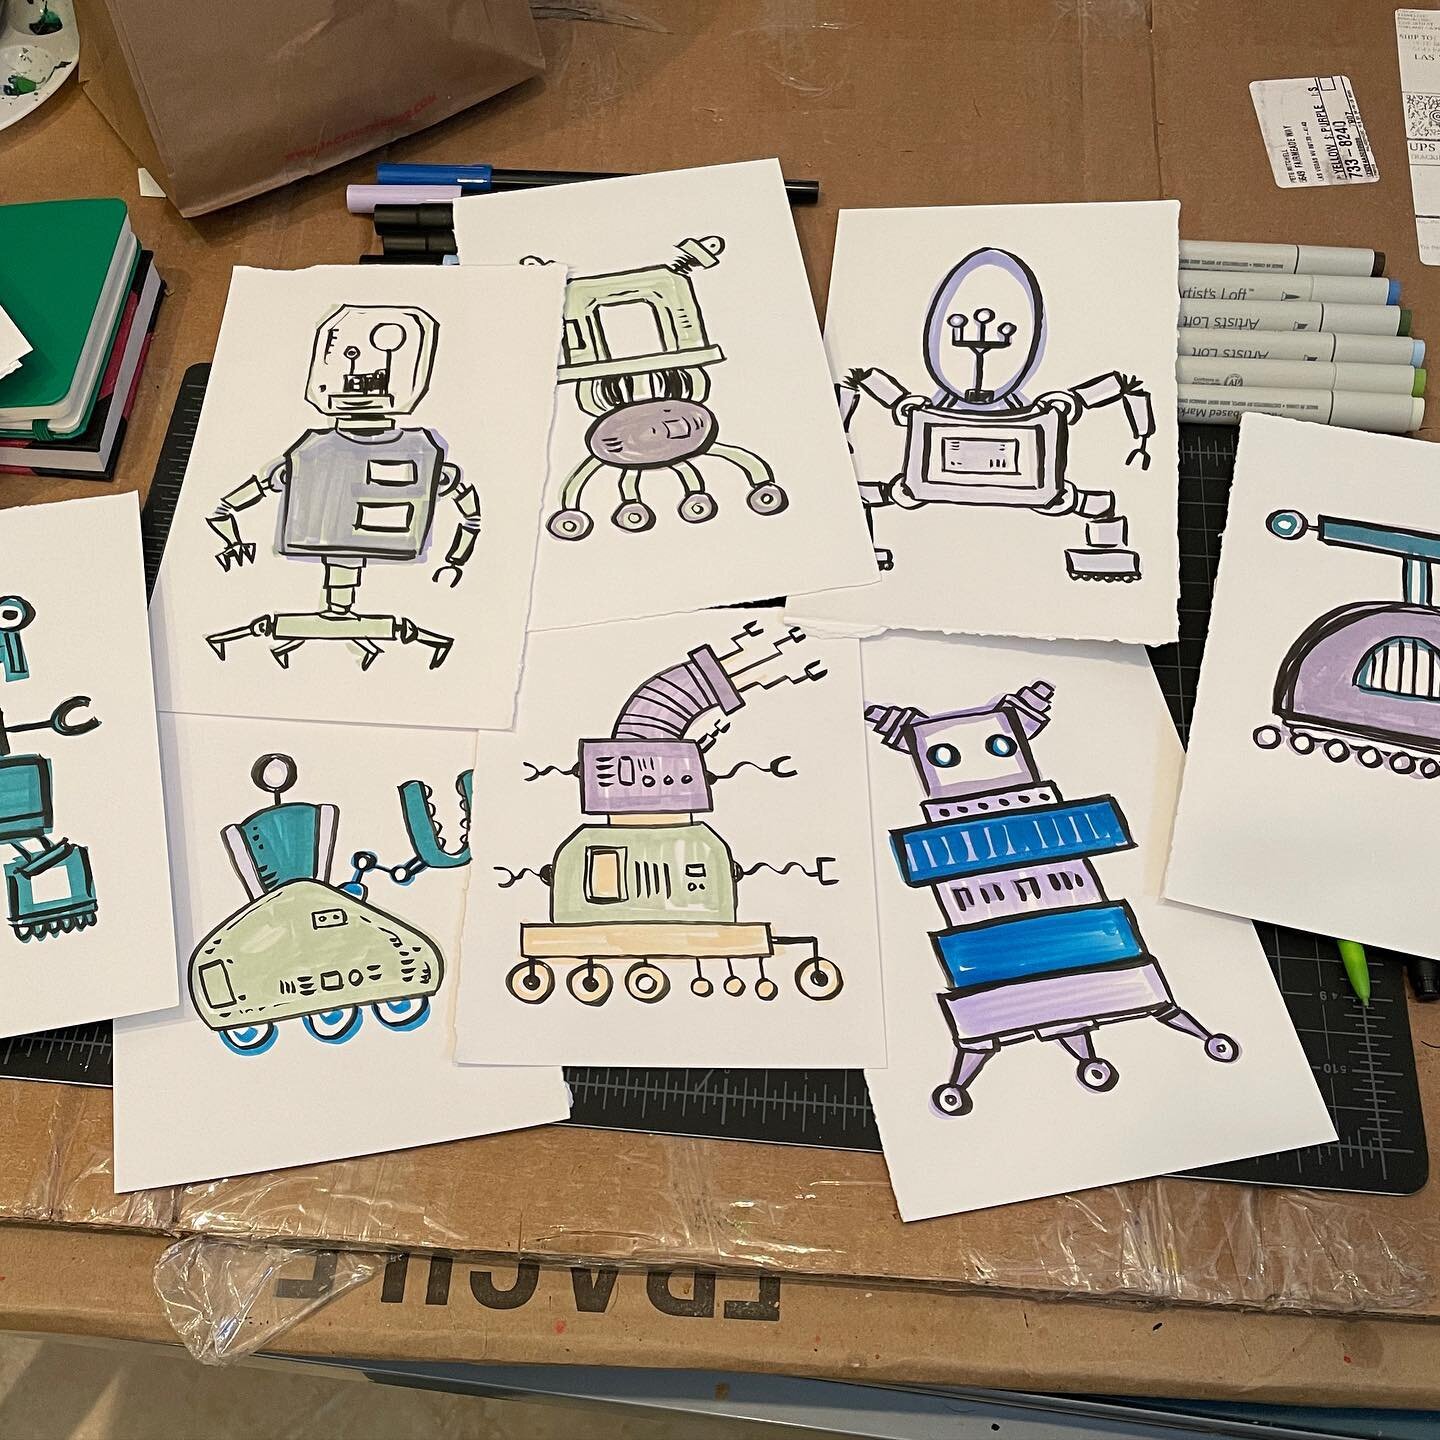 The robot army grows!!